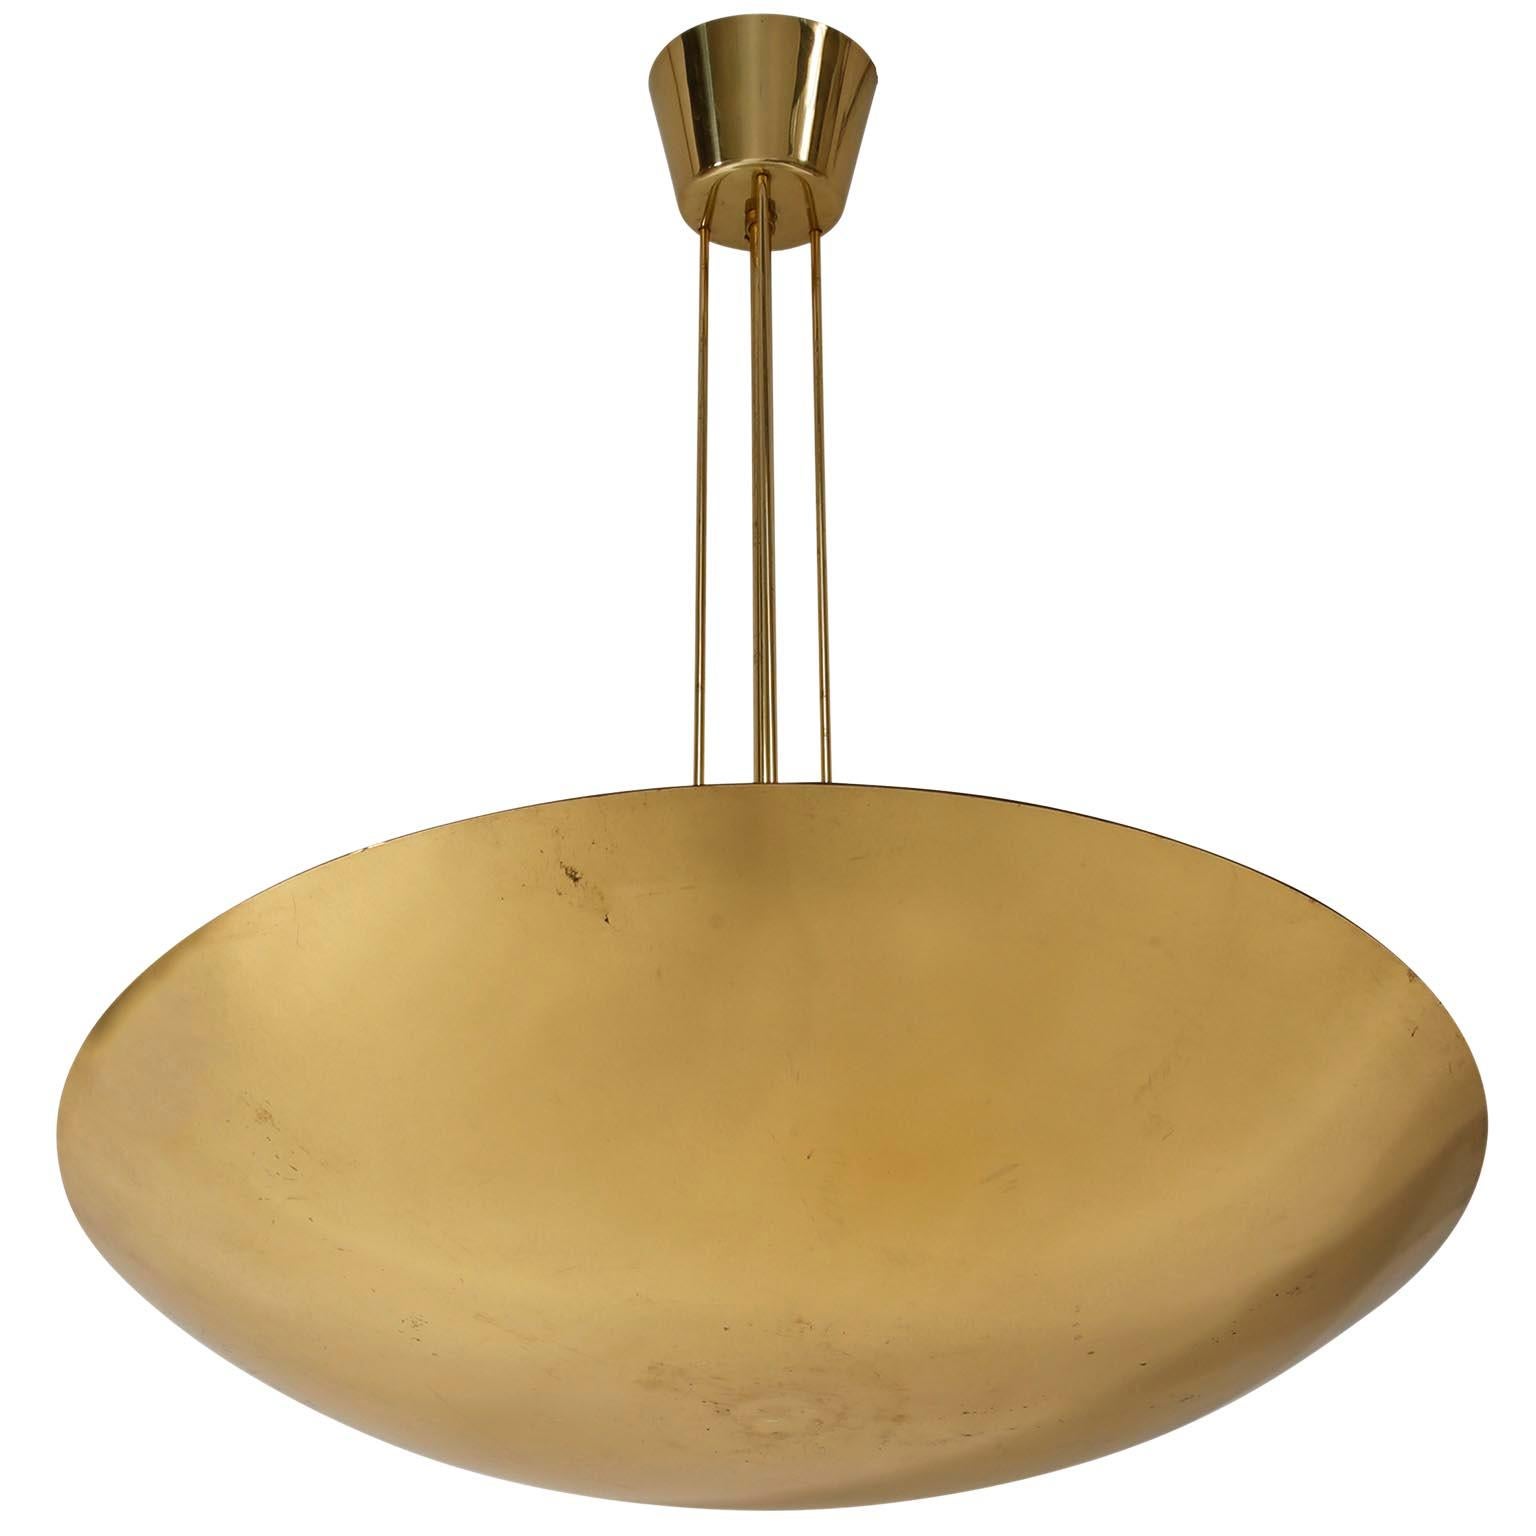 A polished brass bowl up light chandelier / pendant light by J.T. Kalmar, Austria, manufactured in midcentury, circa 1970 (late 1960s or early 1970s).
This uplighter has three sockets for medium screw base bulbs. It works well in US, Europe, Asia,